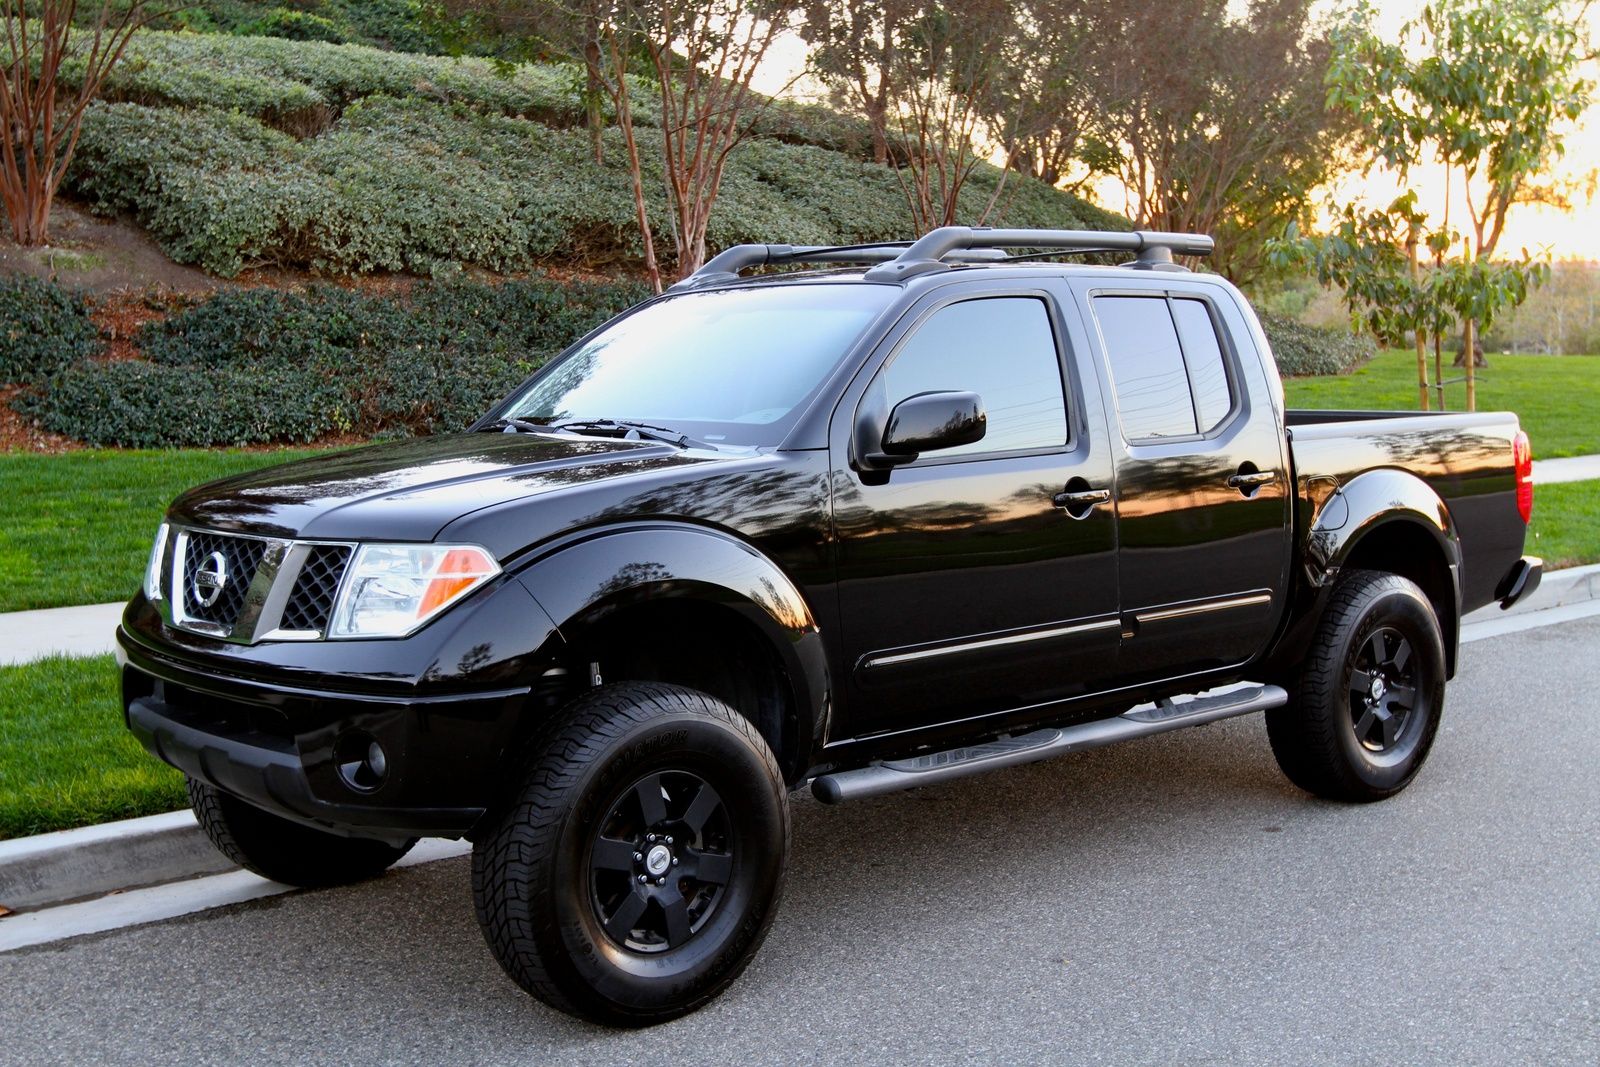 Black 2005 Nissan Frontier driving on the road